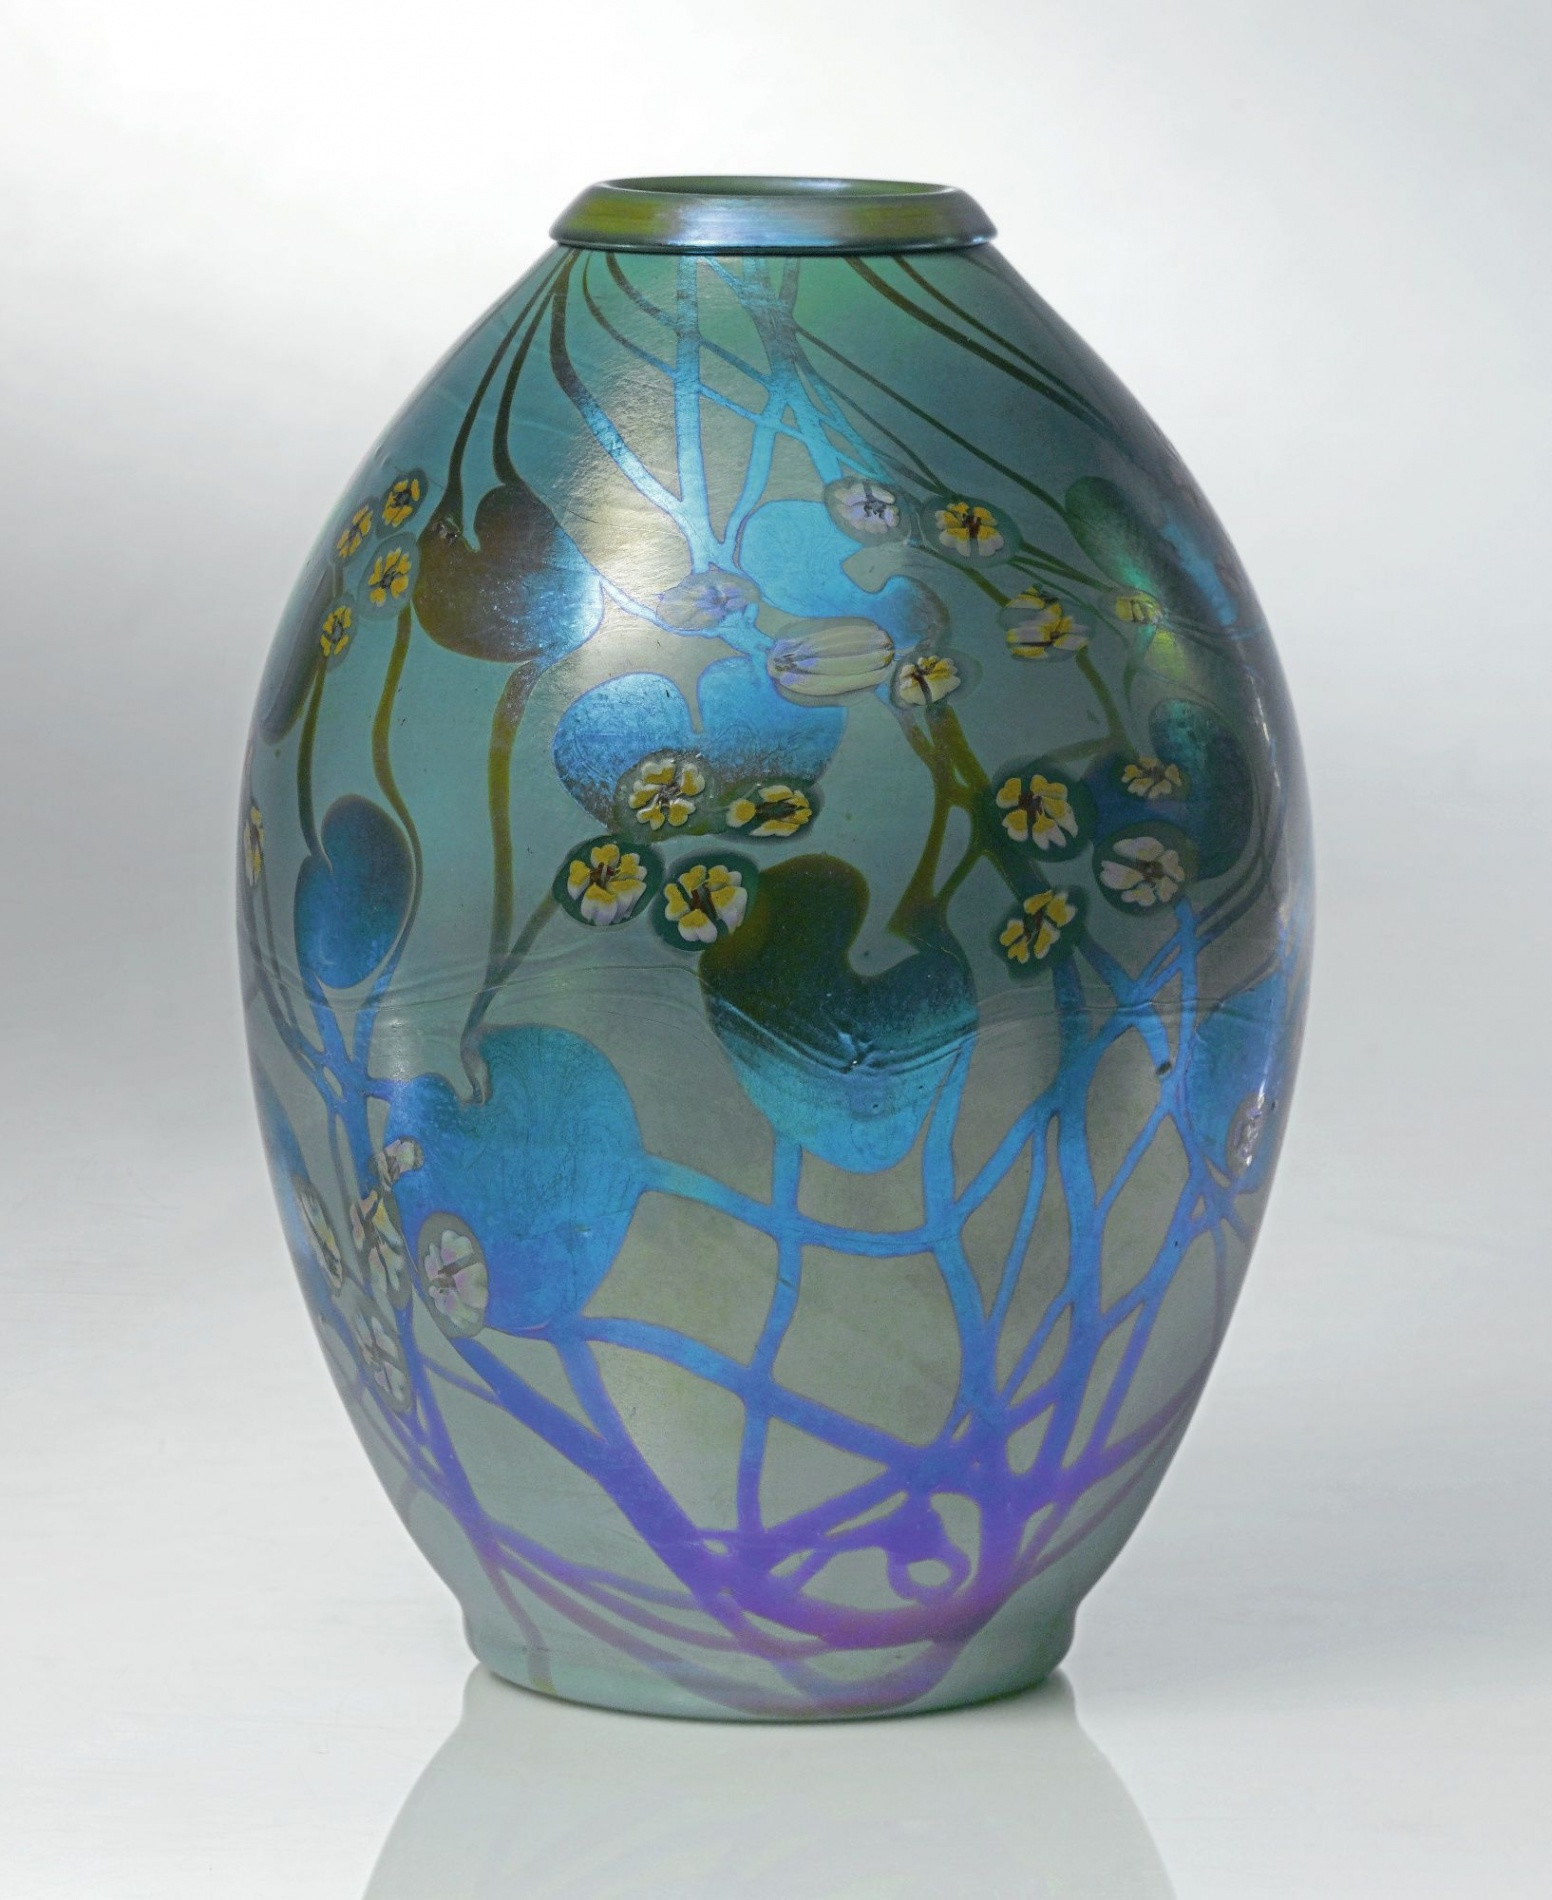 23 Lovable Tiffany Vases for Sale 2023 free download tiffany vases for sale of mari simmulson tahiti 1952 striking turquoise vase mother sweden with regard to image de tiffany studios millefiore decorated vase objet deco turquoise